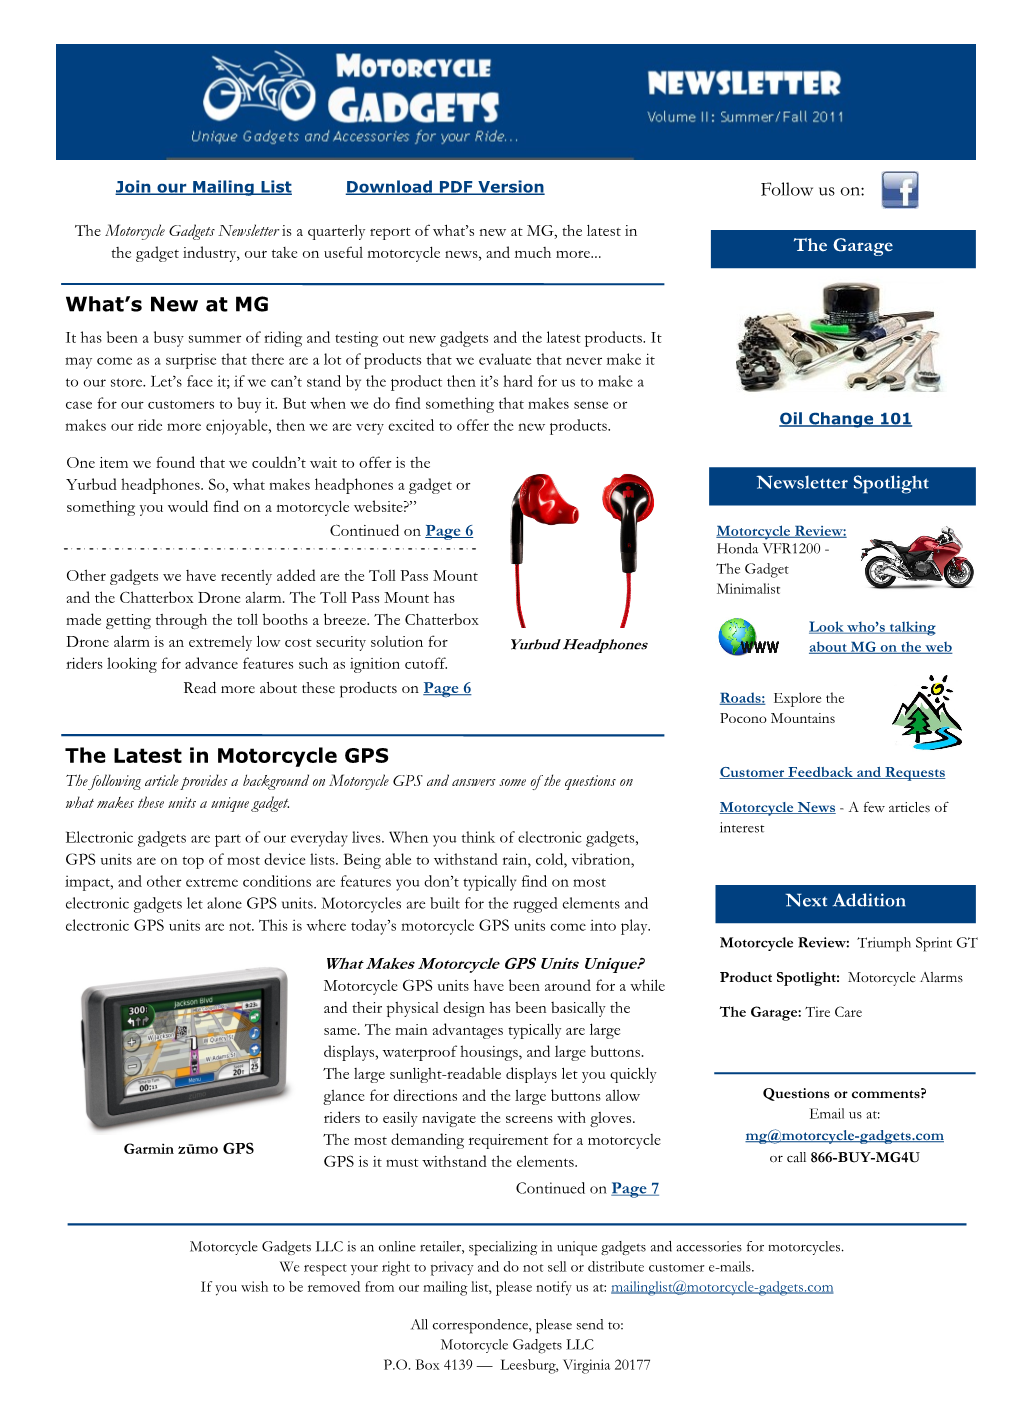 What's New at MG the Latest in Motorcycle GPS the Garage